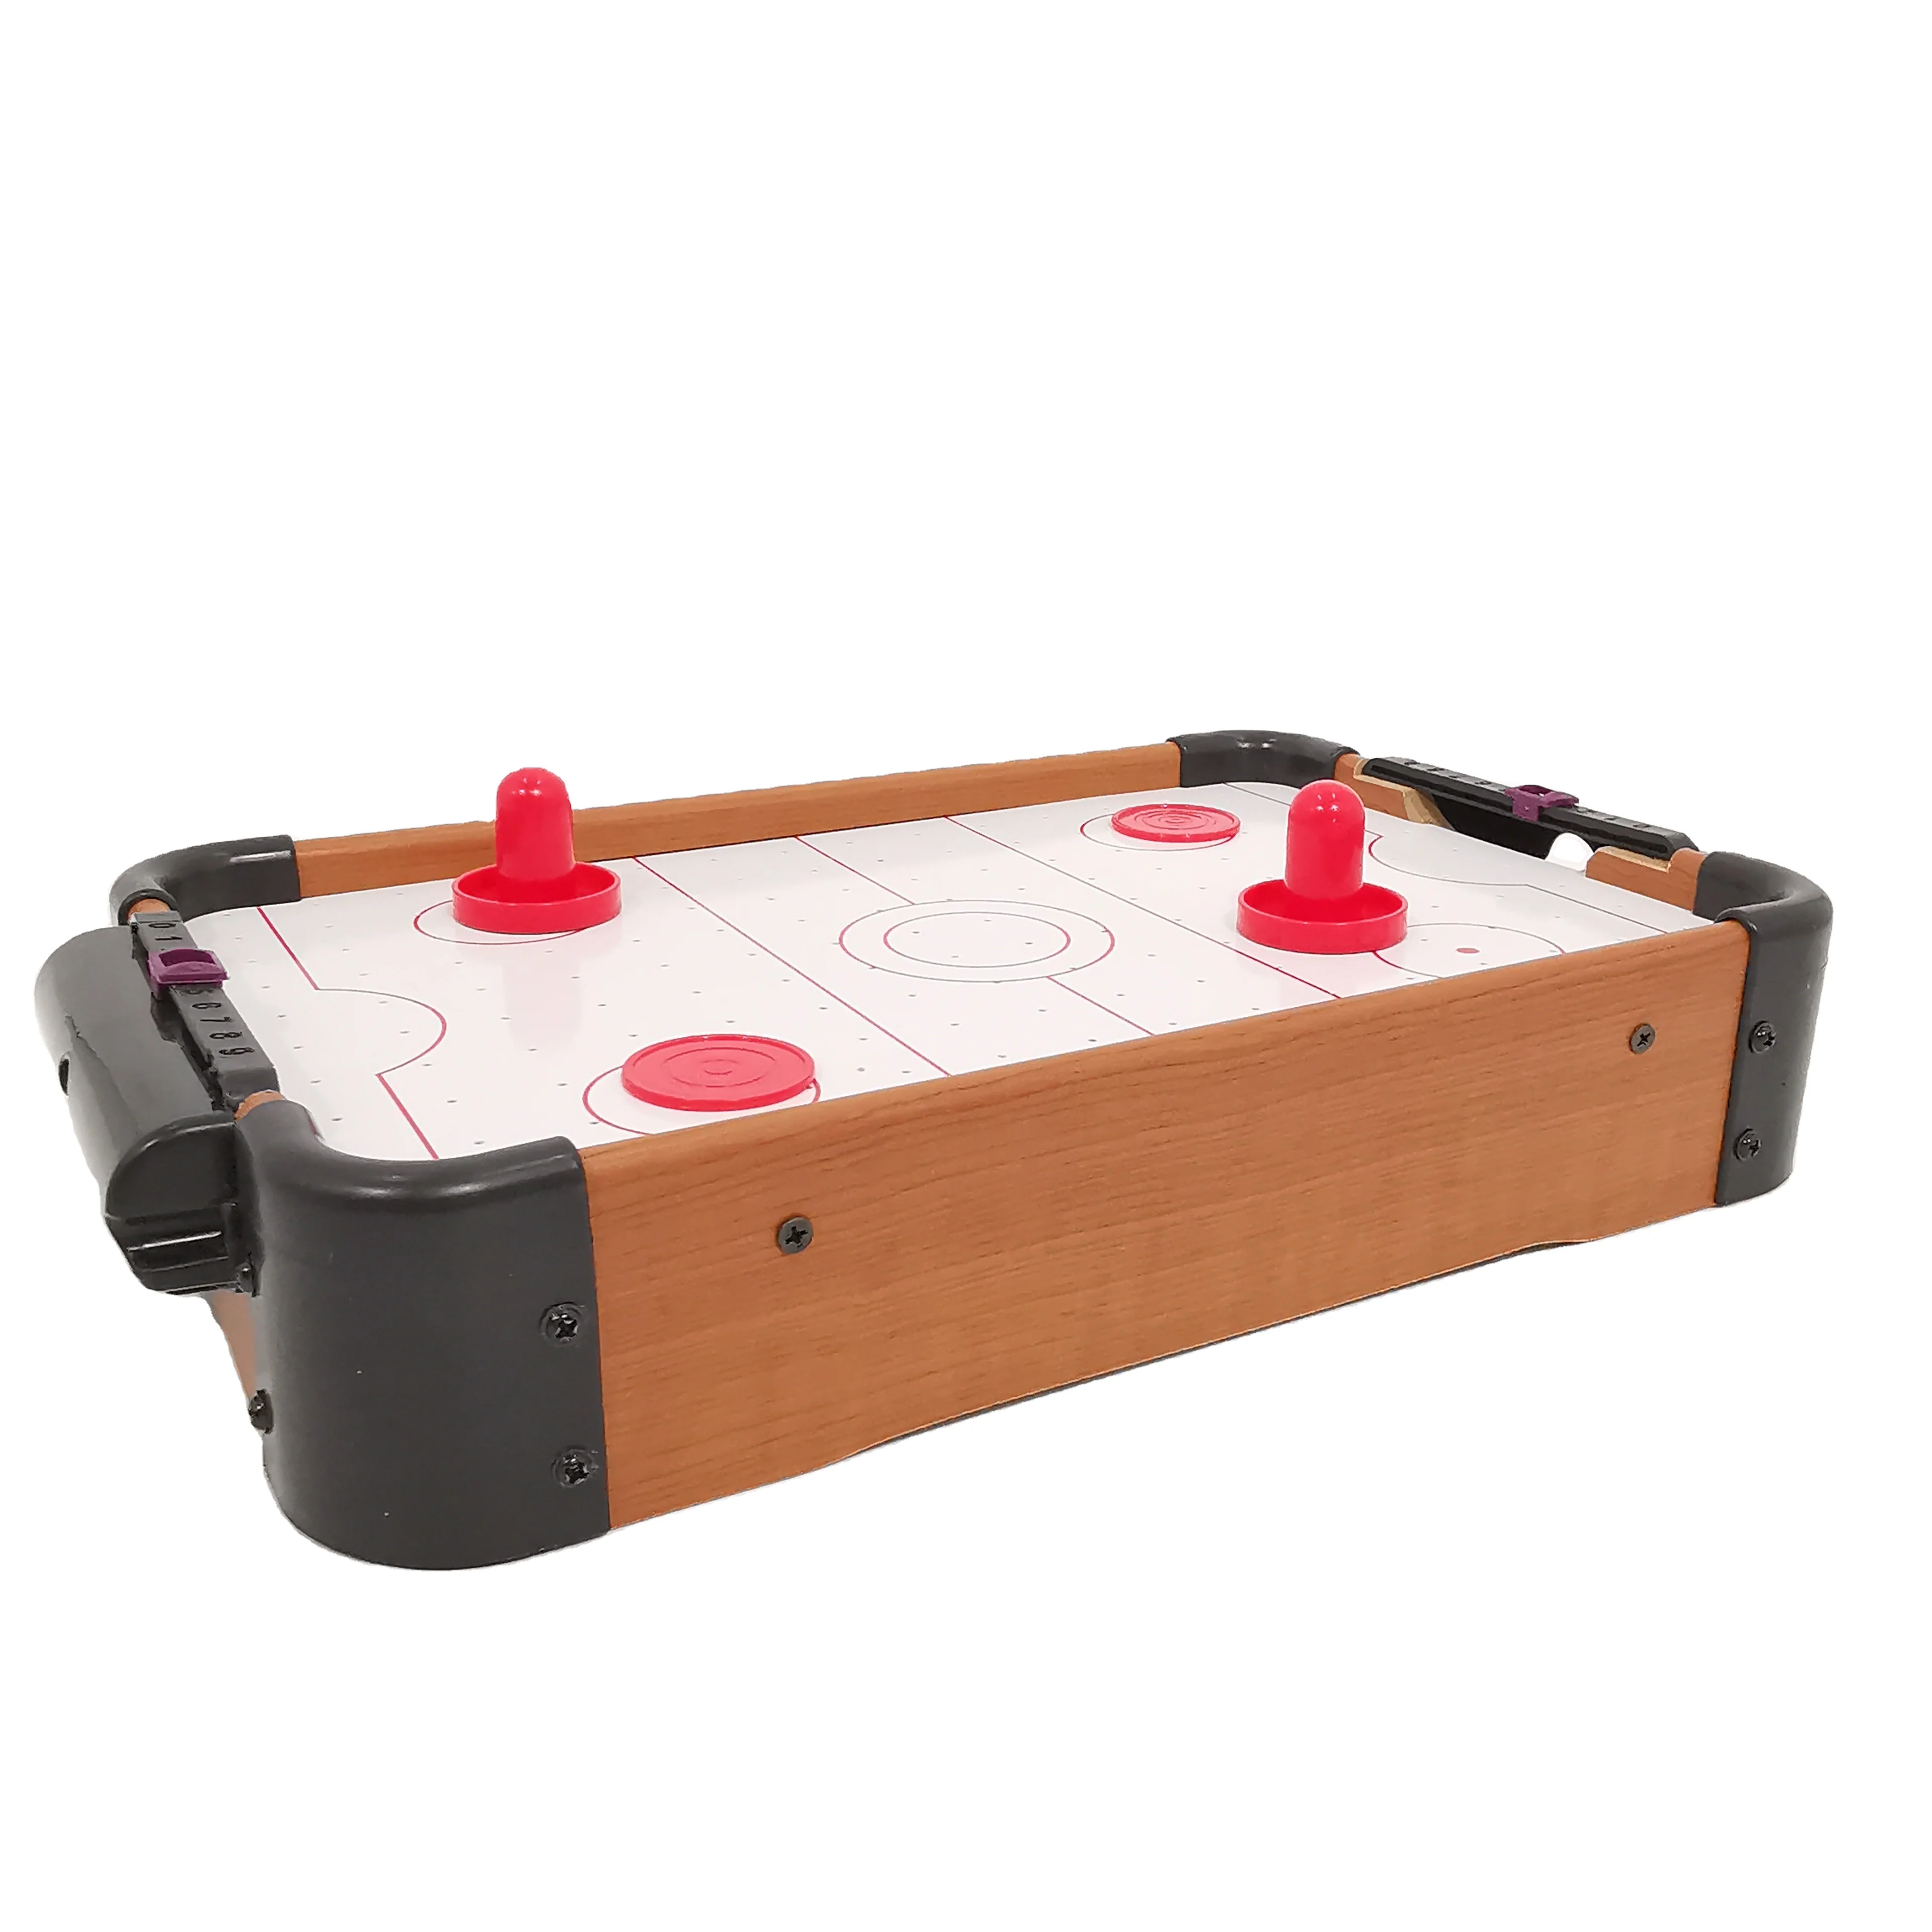 
Exquisite Structure Manufacturing Air Hockey Table Cheap Air Hockey Table 